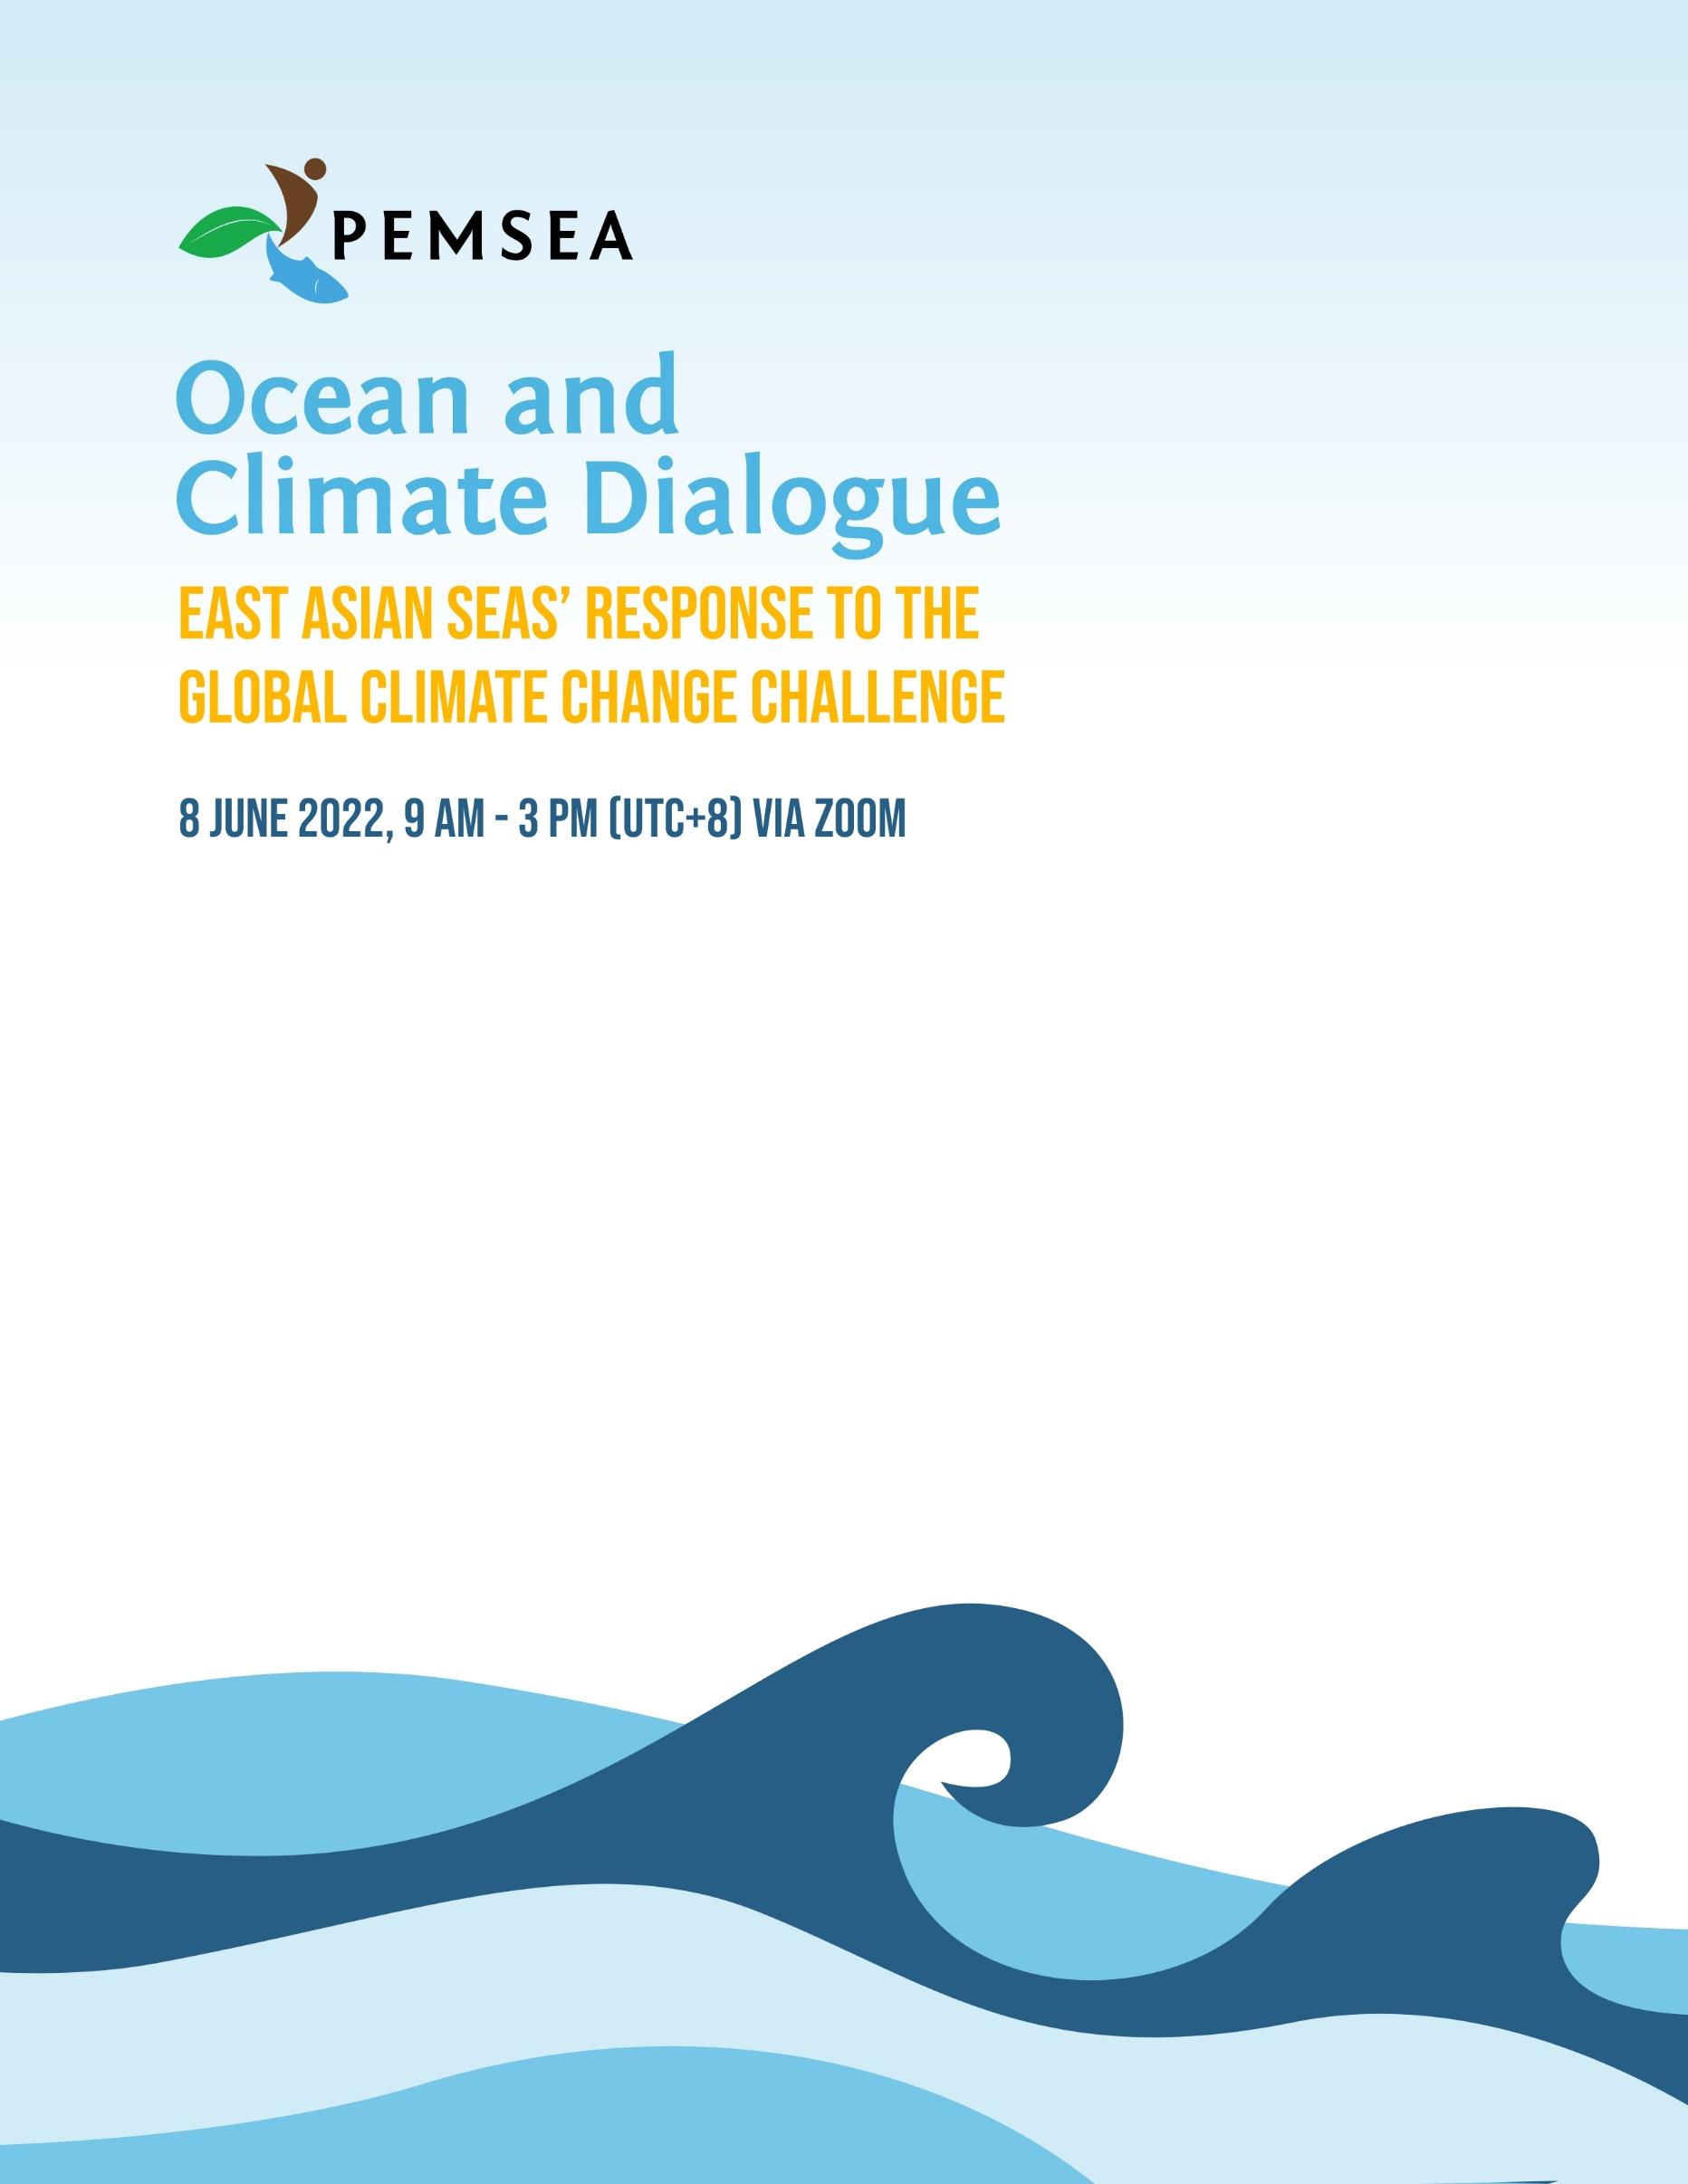 Ocean and Climate Dialogue East Asian Seas’ Response to the Global Climate Change Challenge